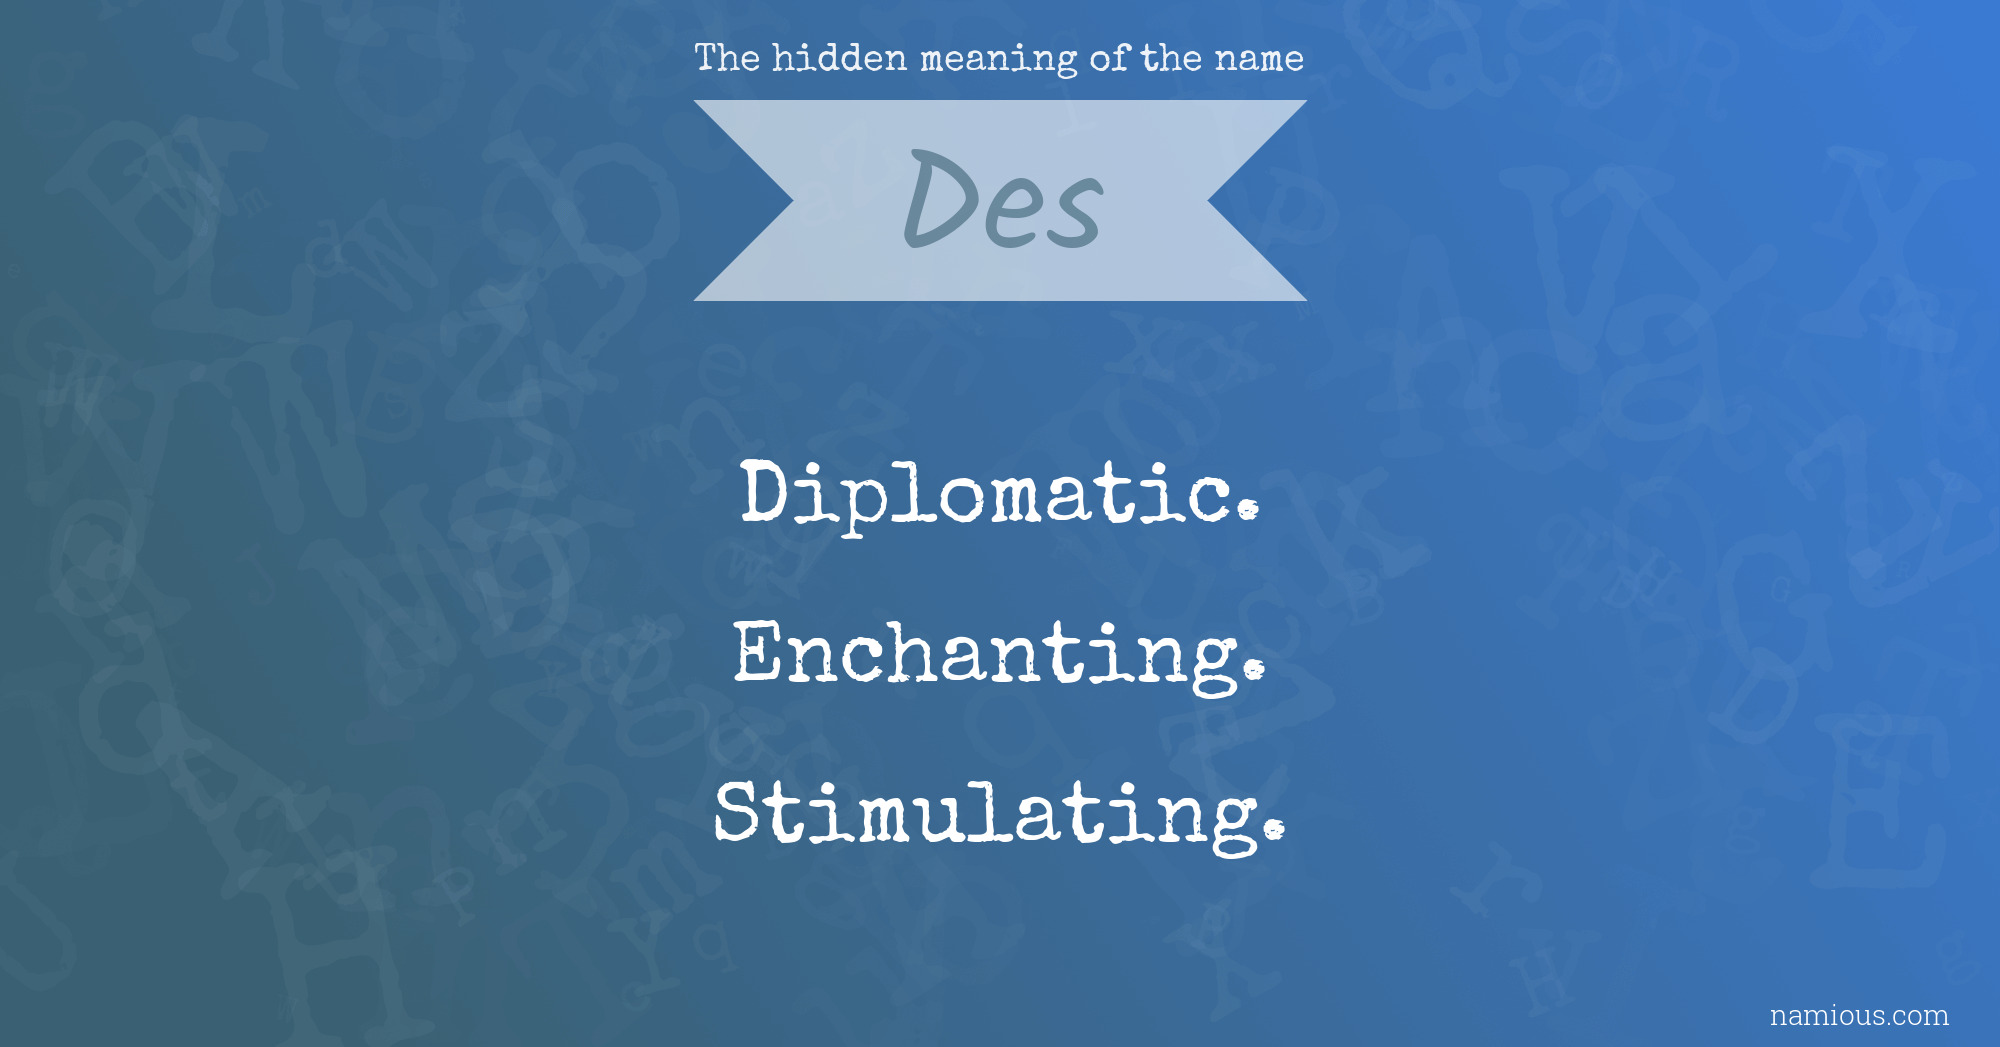 The hidden meaning of the name Des